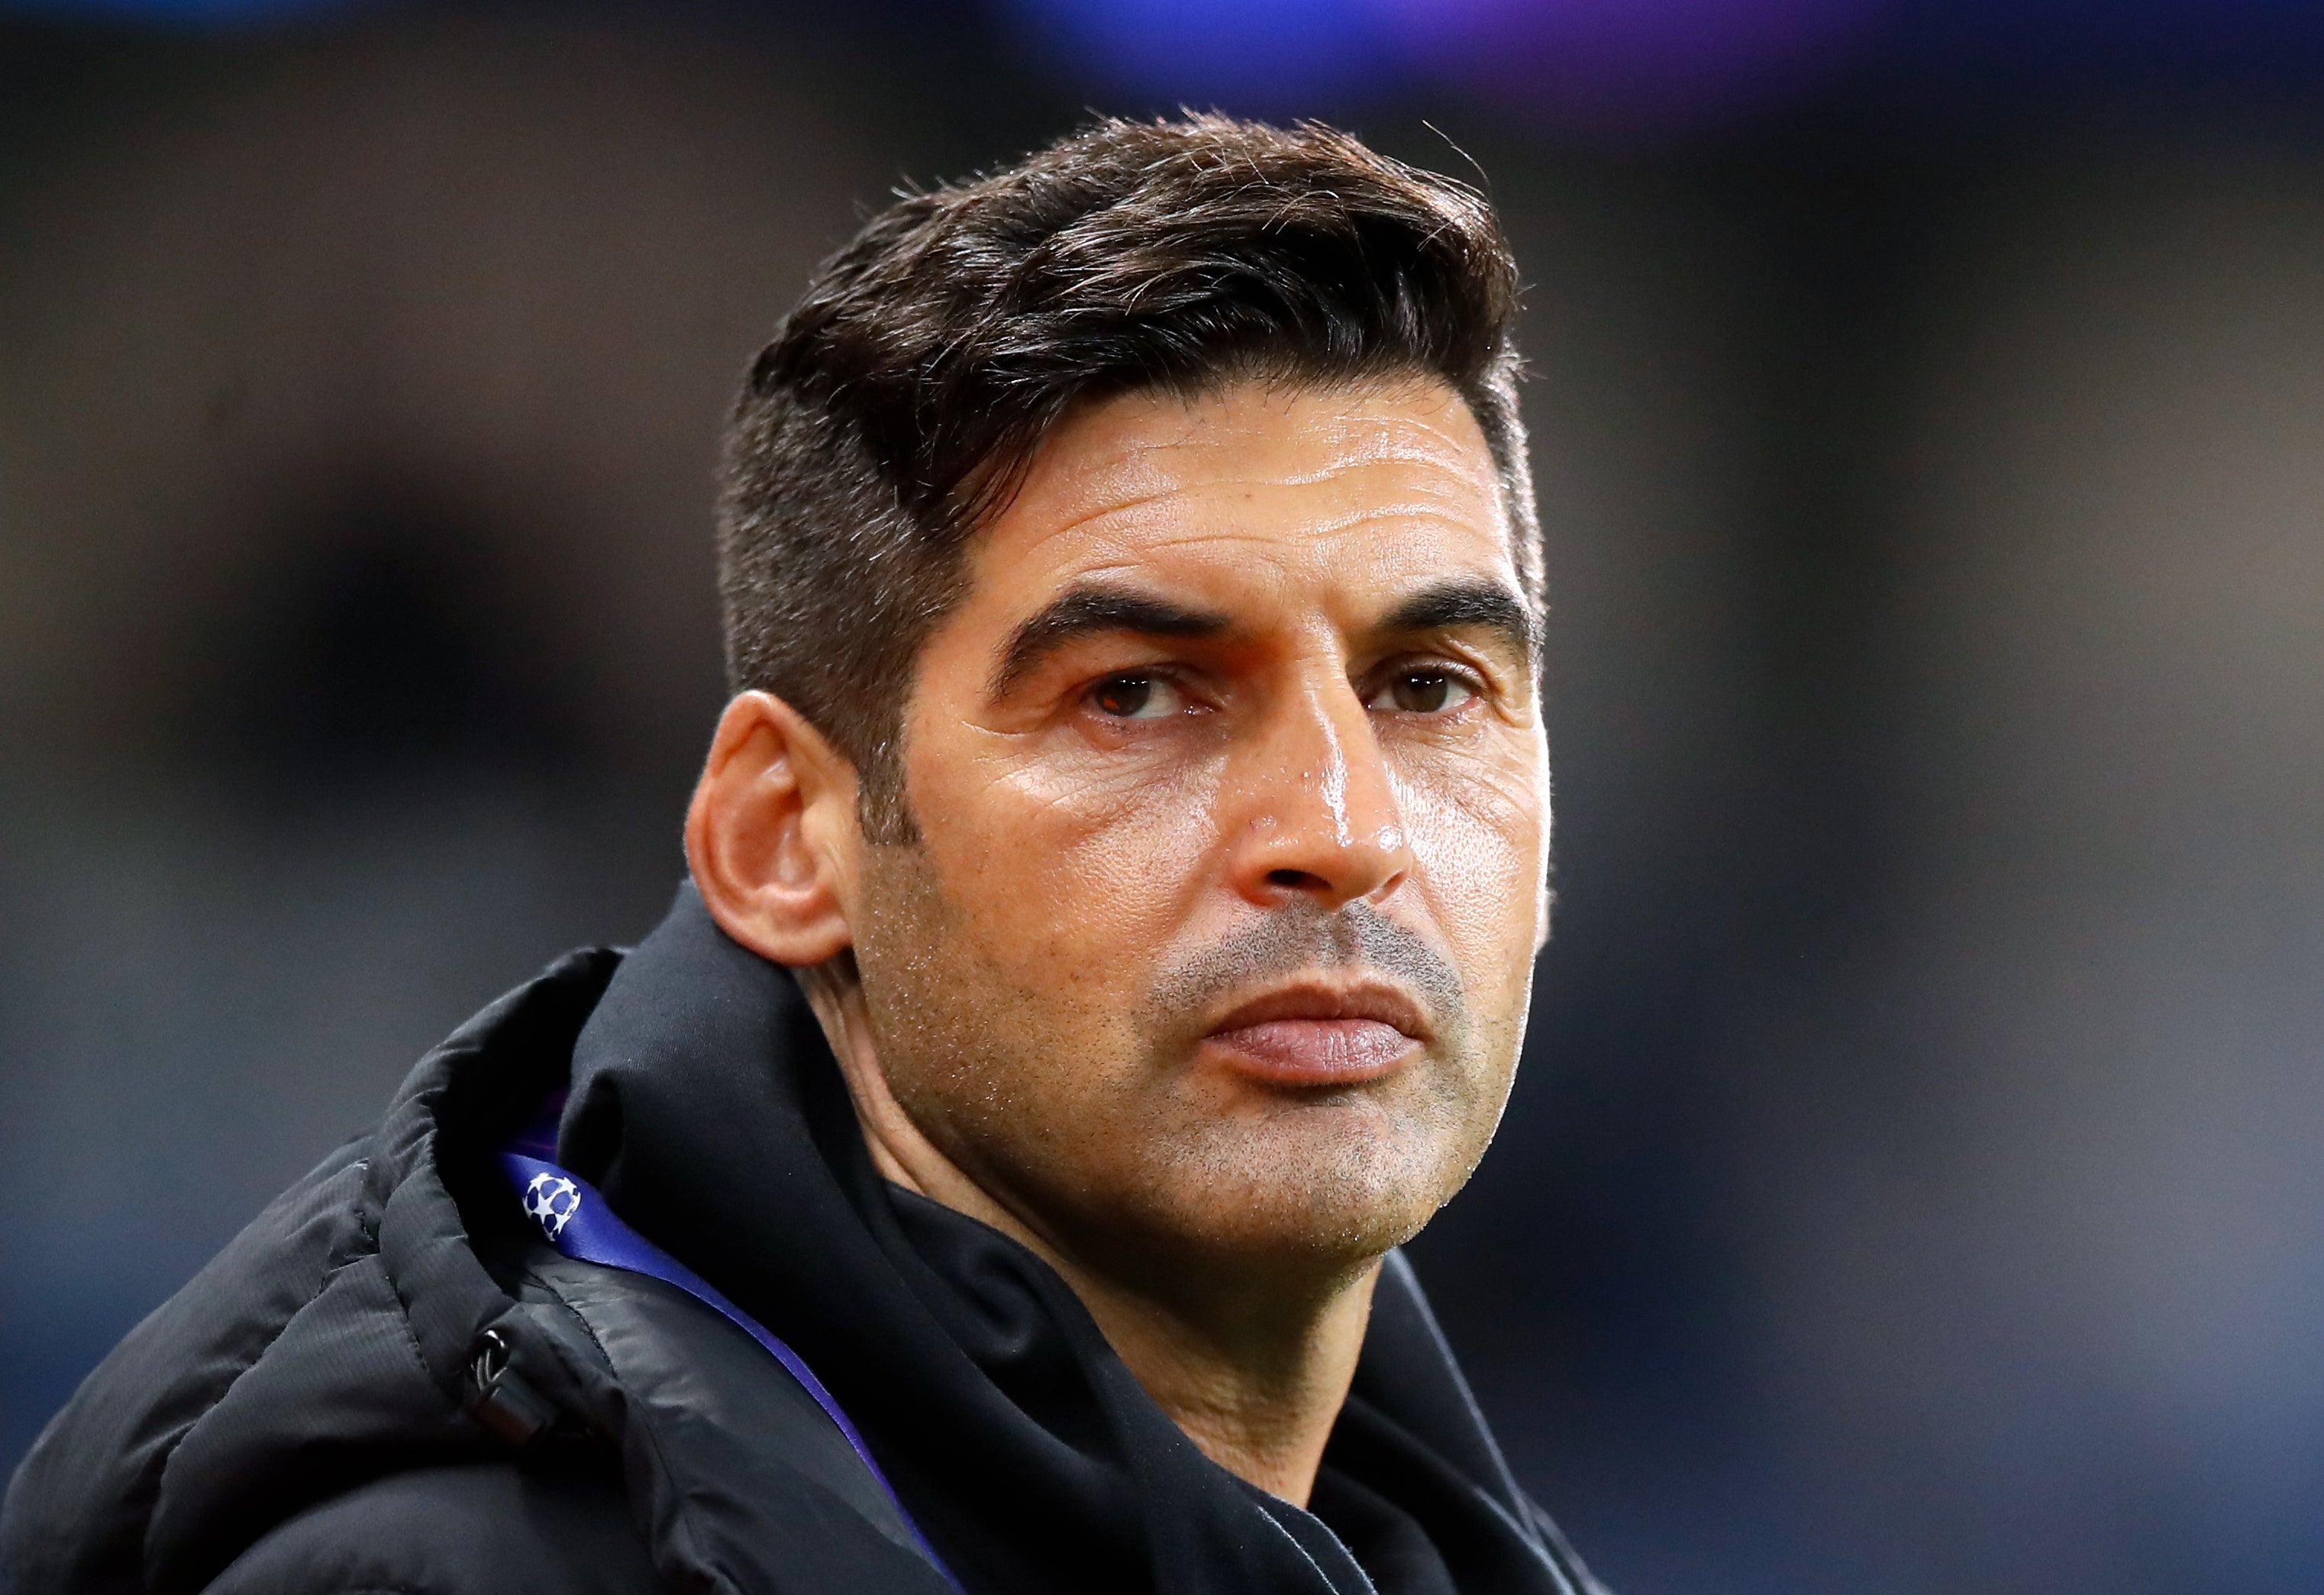 Paulo Fonseca fled Kyiv with his wife and children